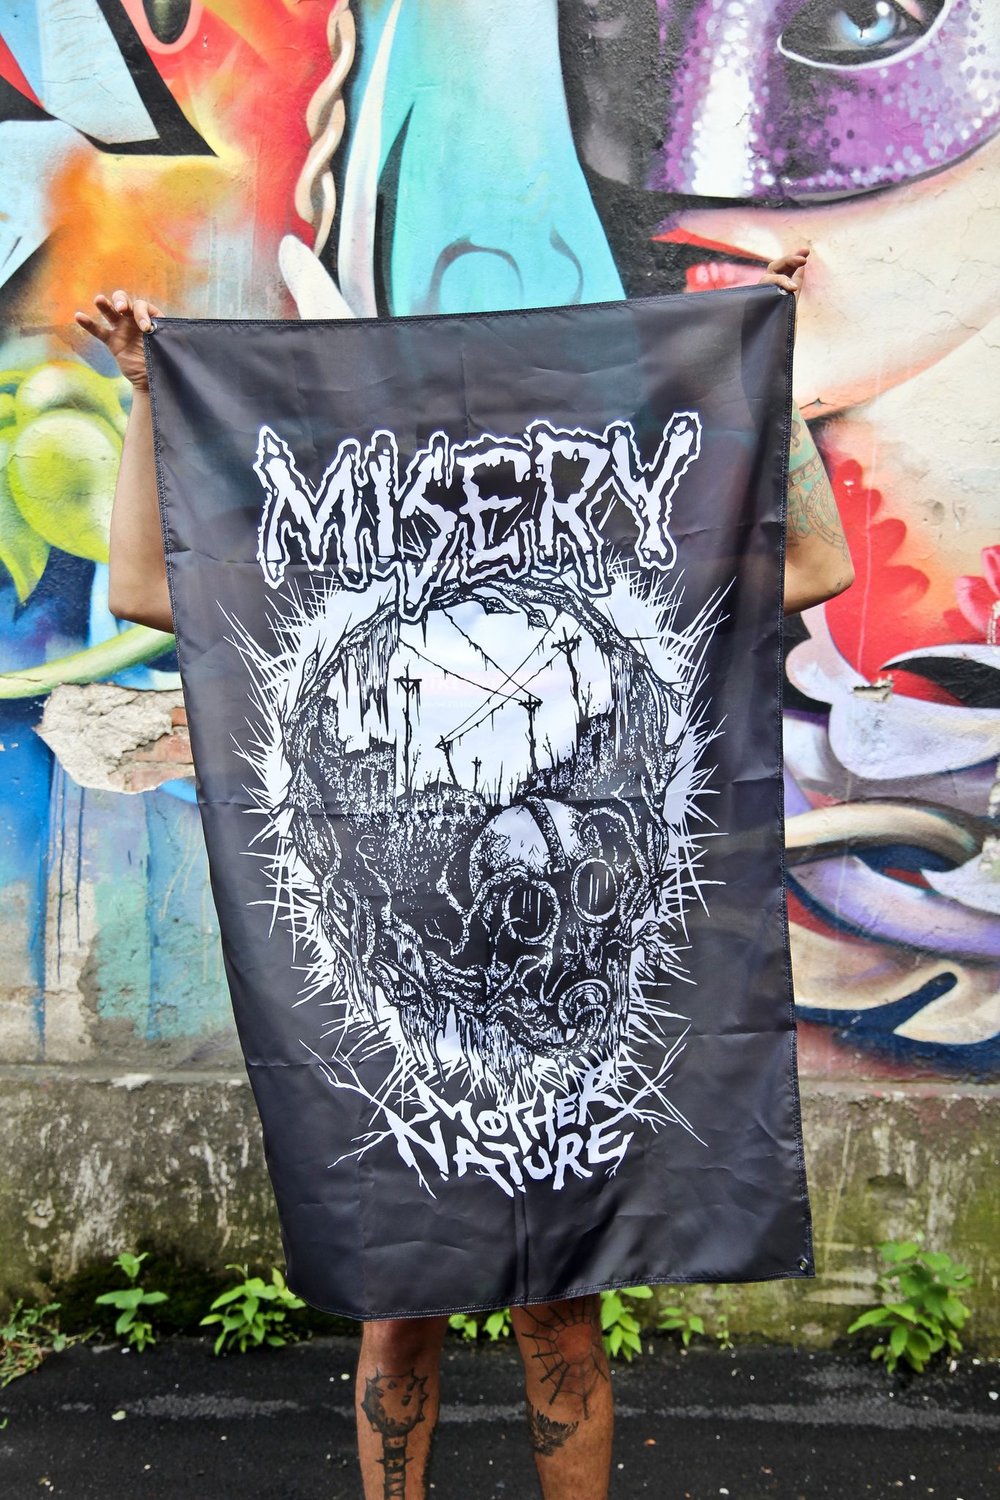 MISERY 'FROM WHERE THE SUN NEVER SHINES' 2 x LP